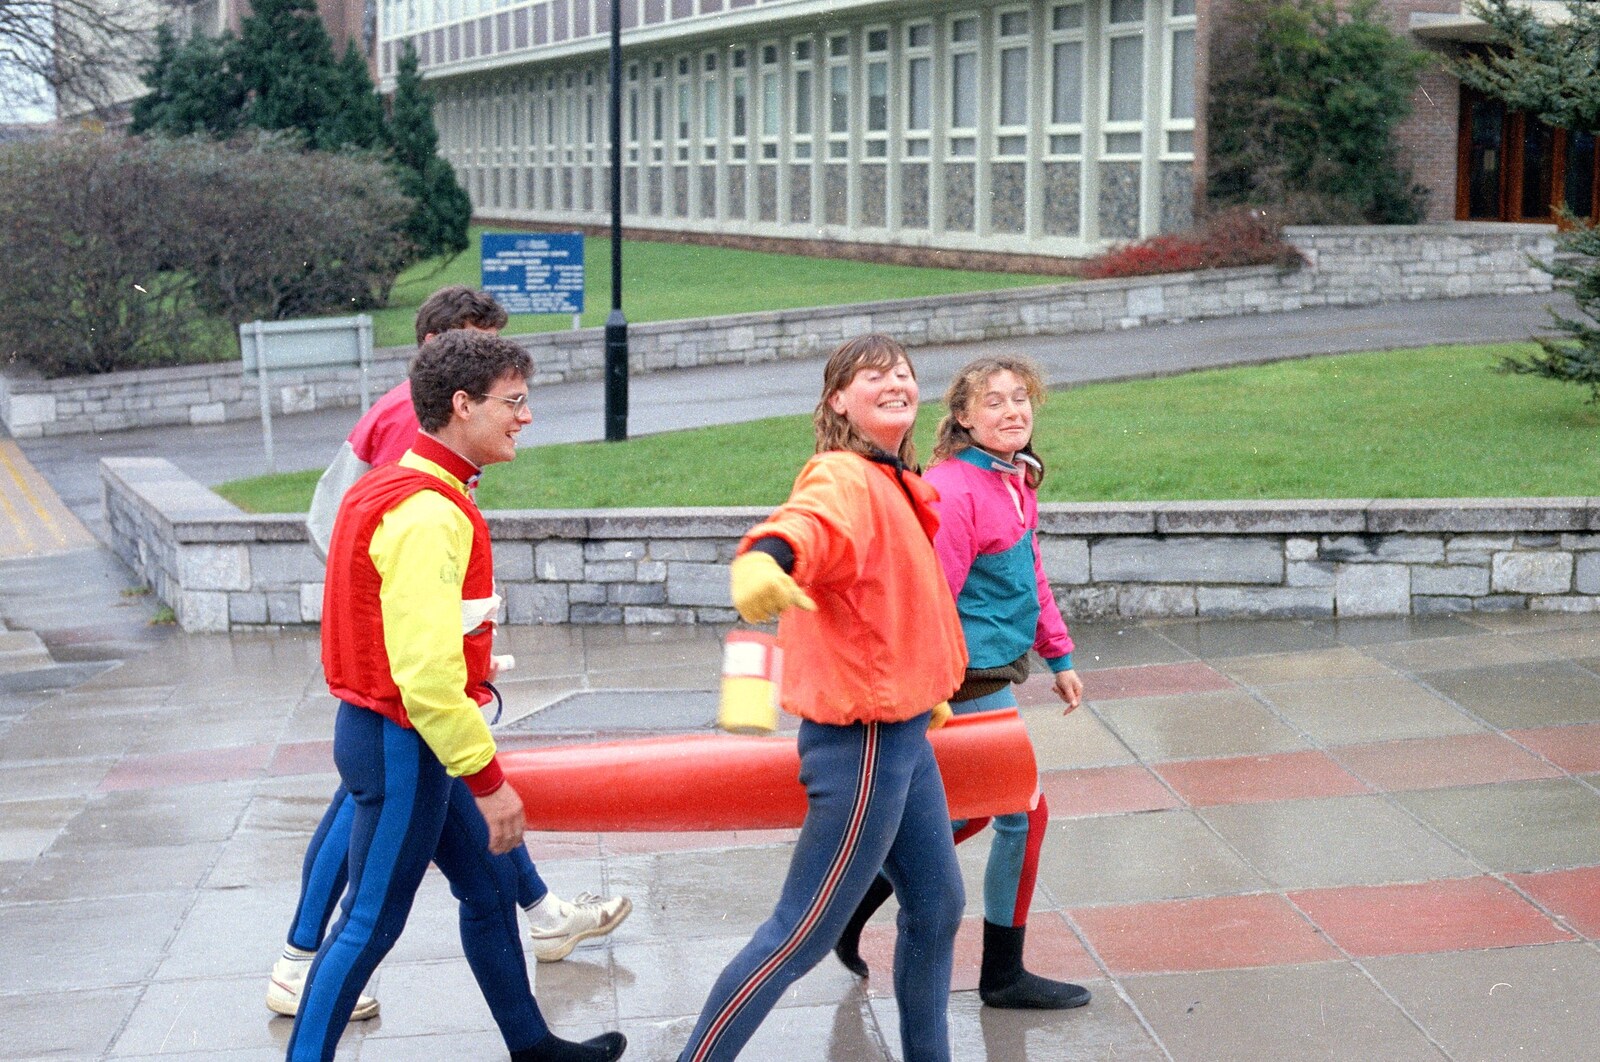 The canoe club walk past the link building from Uni: The PPSU Pirate RAG Parade, Plymouth, Devon - 14th February 1987